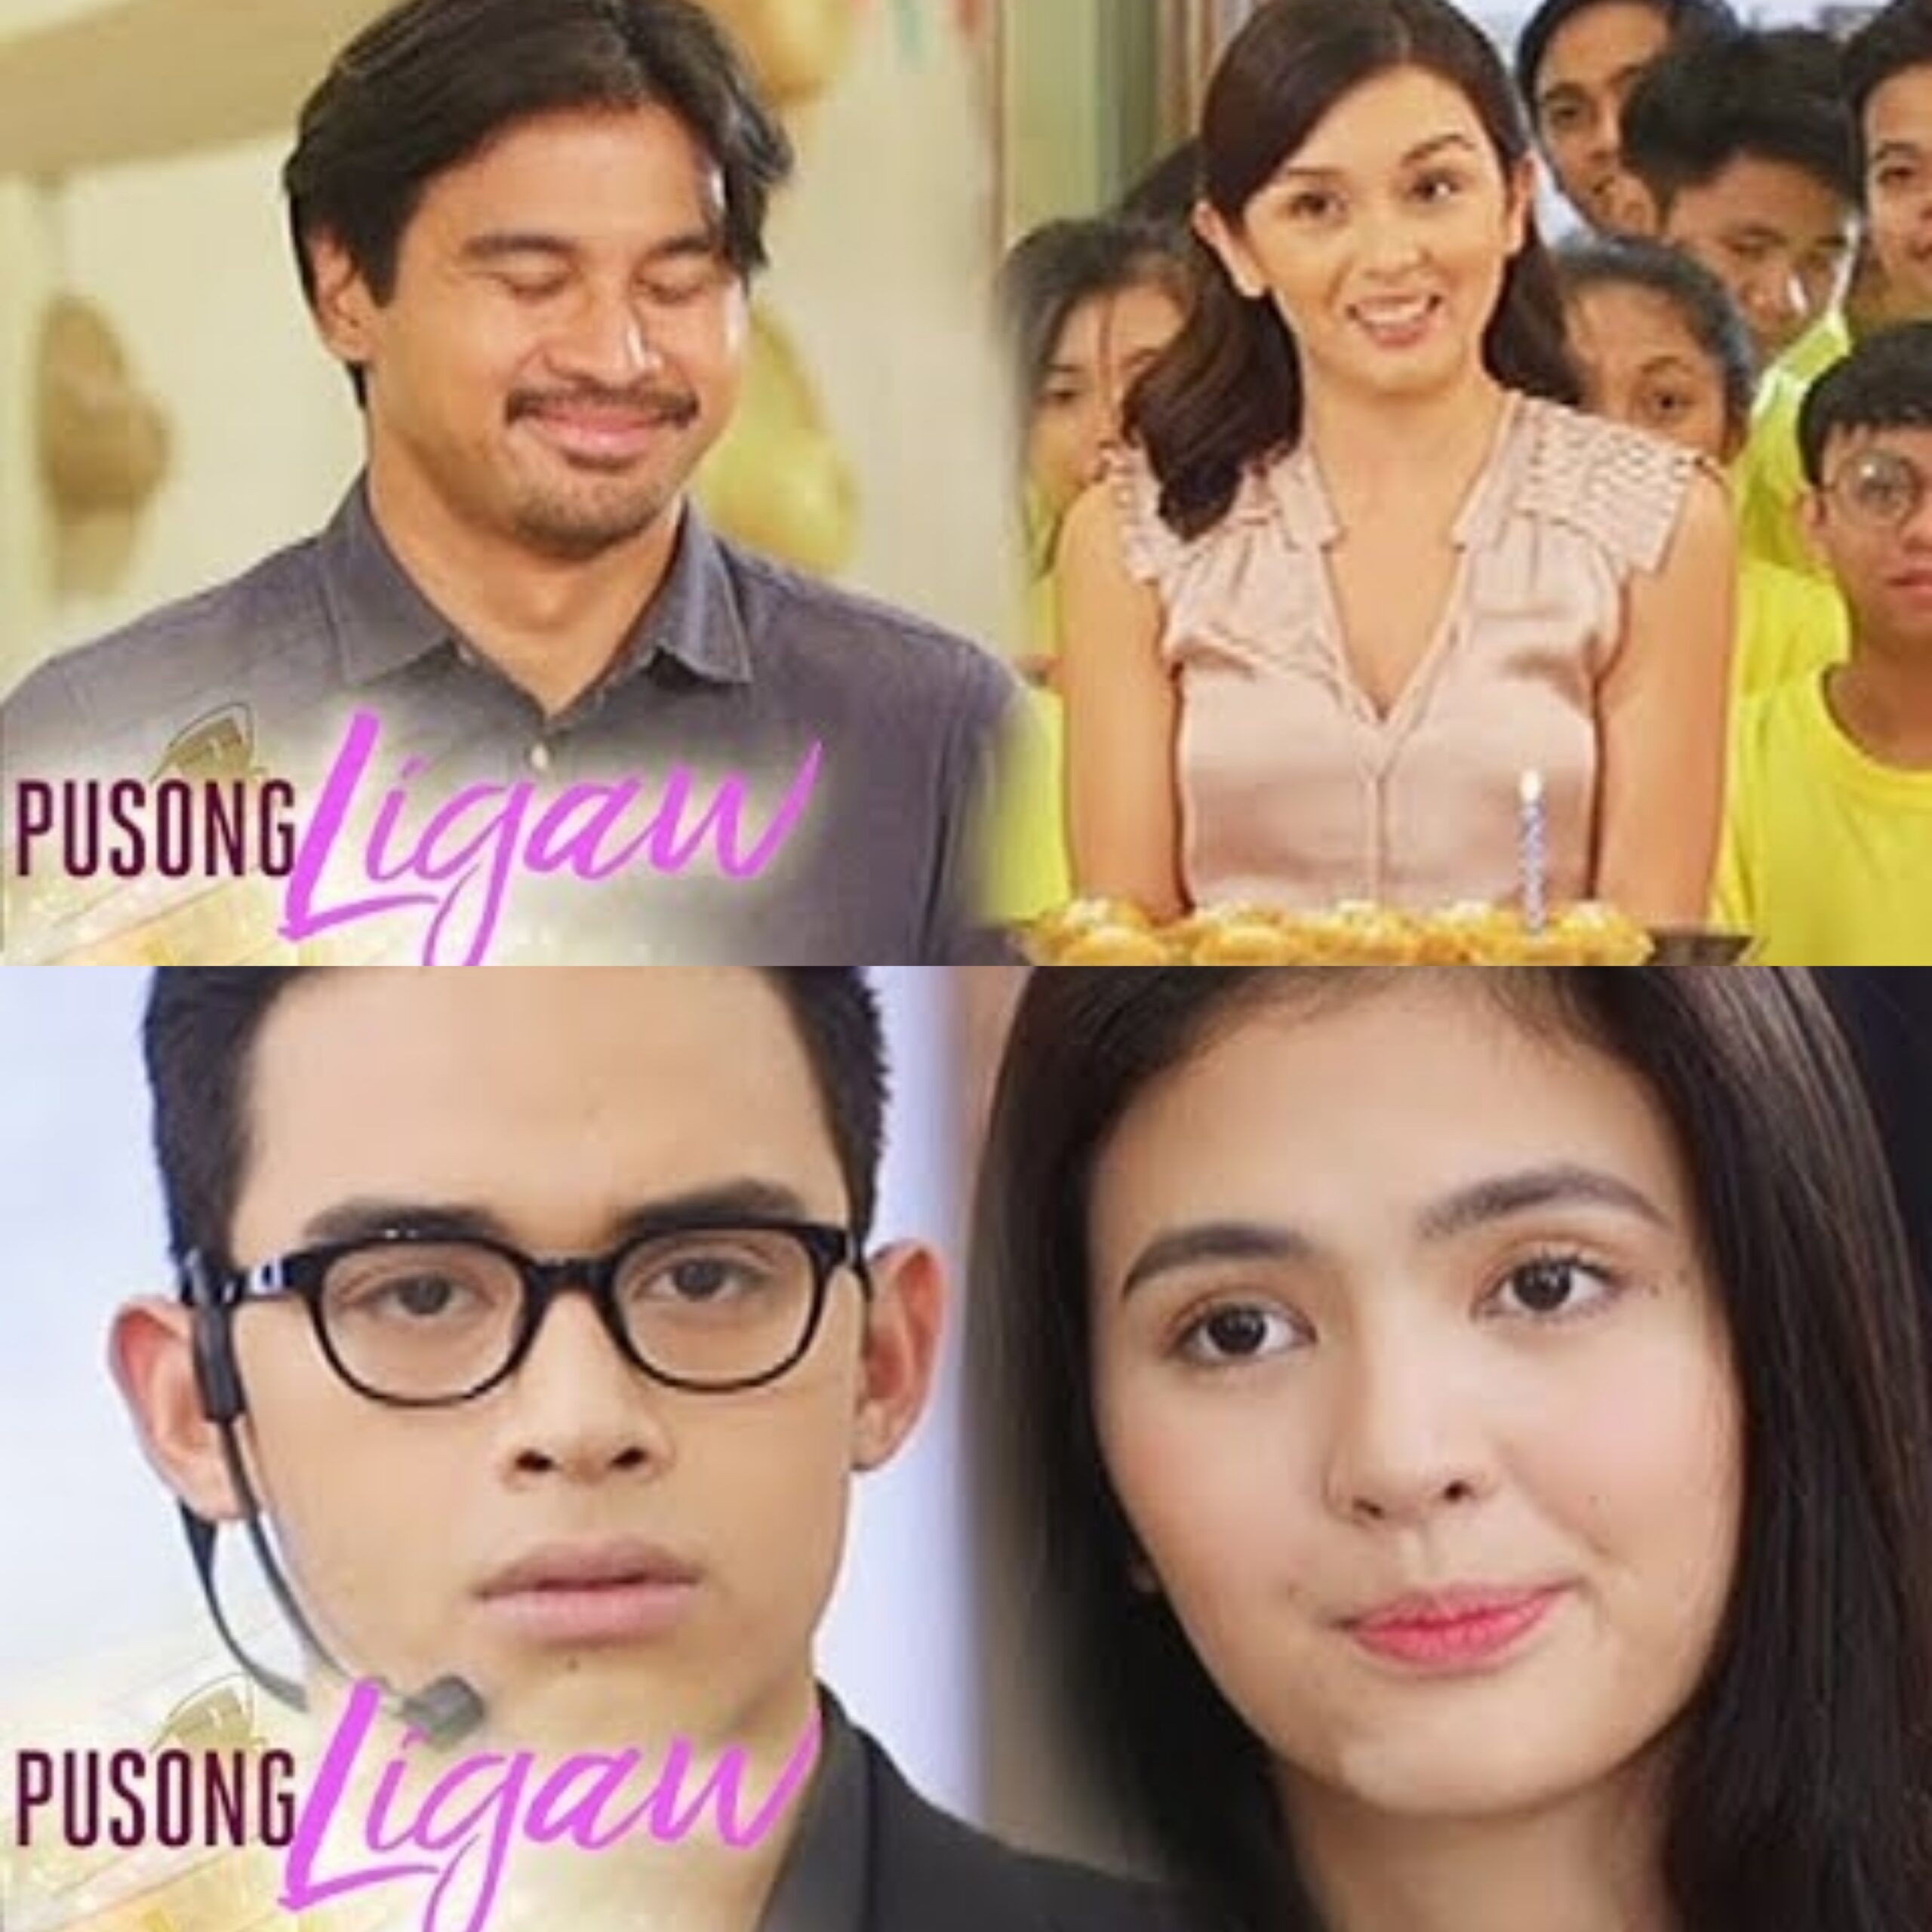 Lost Hearts (Pusong Ligaw) Episode 64 Vida is shocked to see Potpot after accepting Rafa's proposal